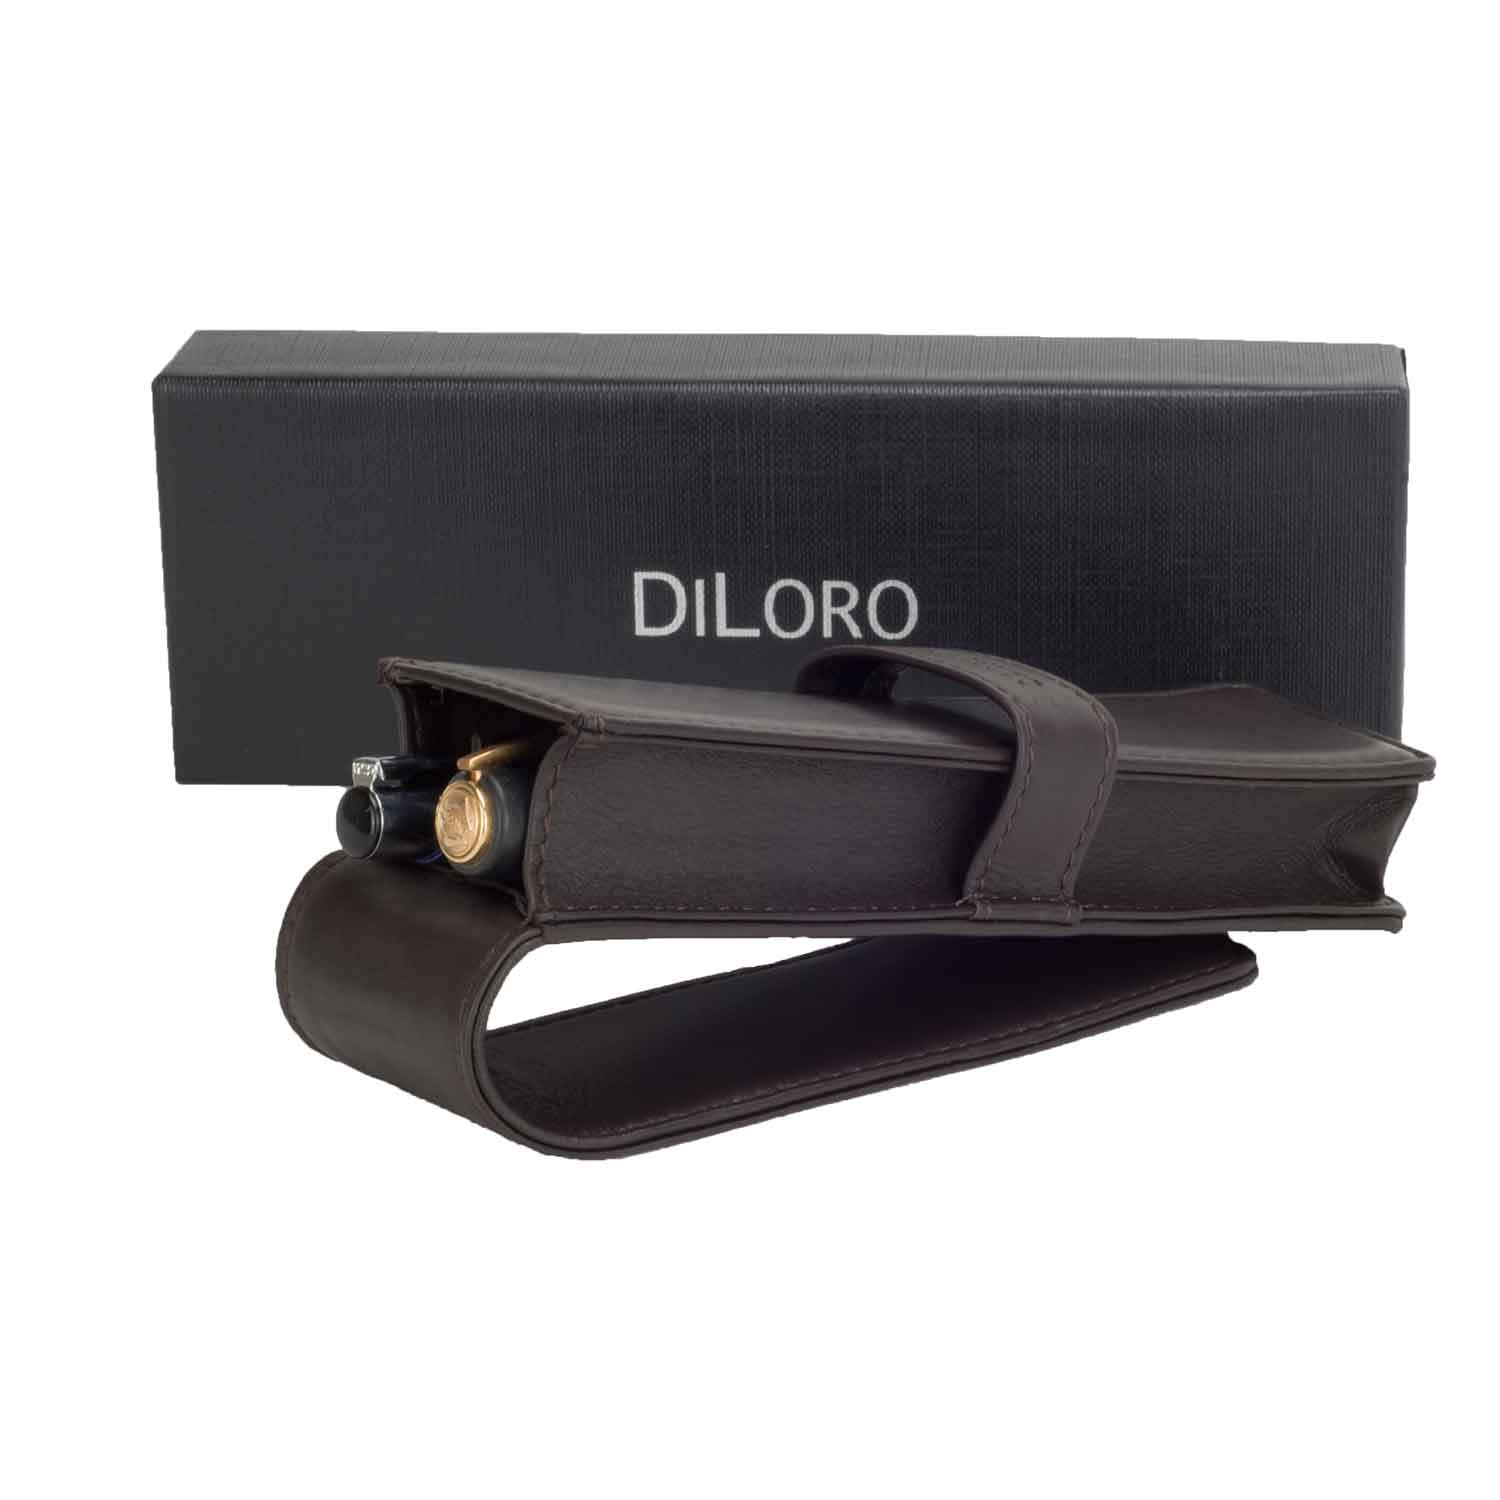 DiLoro Double Pen Case Holder in Top Quality, Full Grain Nappa Leather - Dark Brown (inside view)